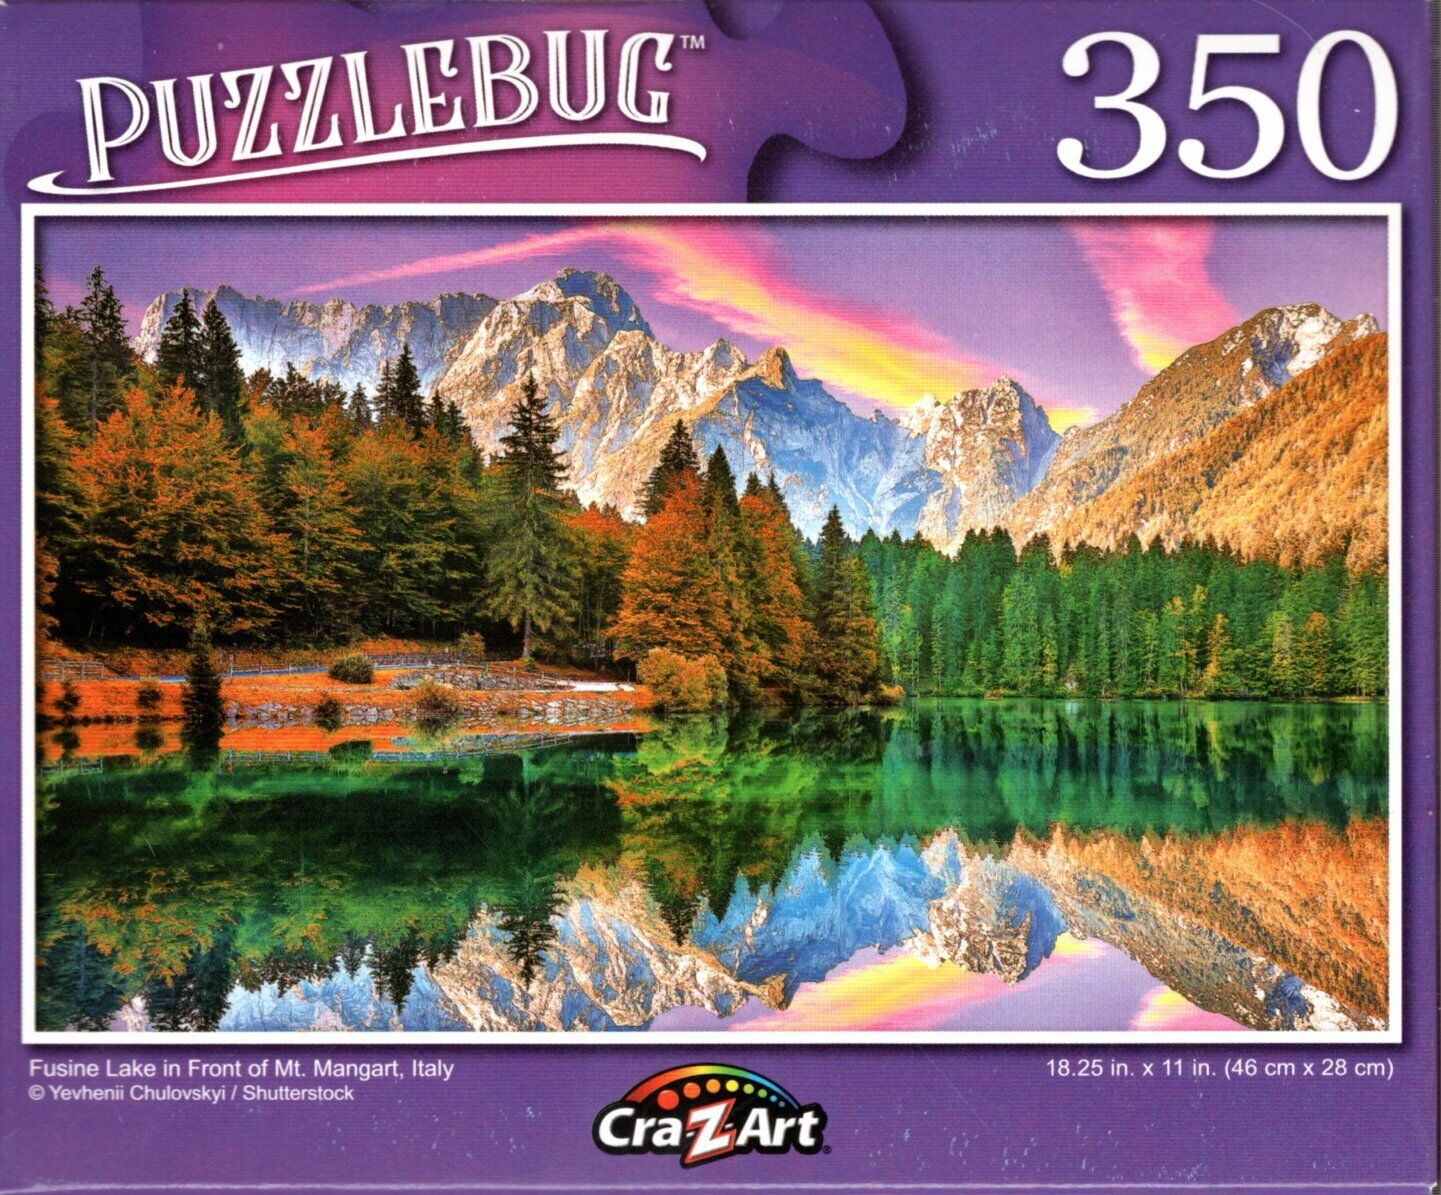 Fusine Lake in Front of Mt. Mangart, Italy - 350 Pieces Jigsaw Puzzle